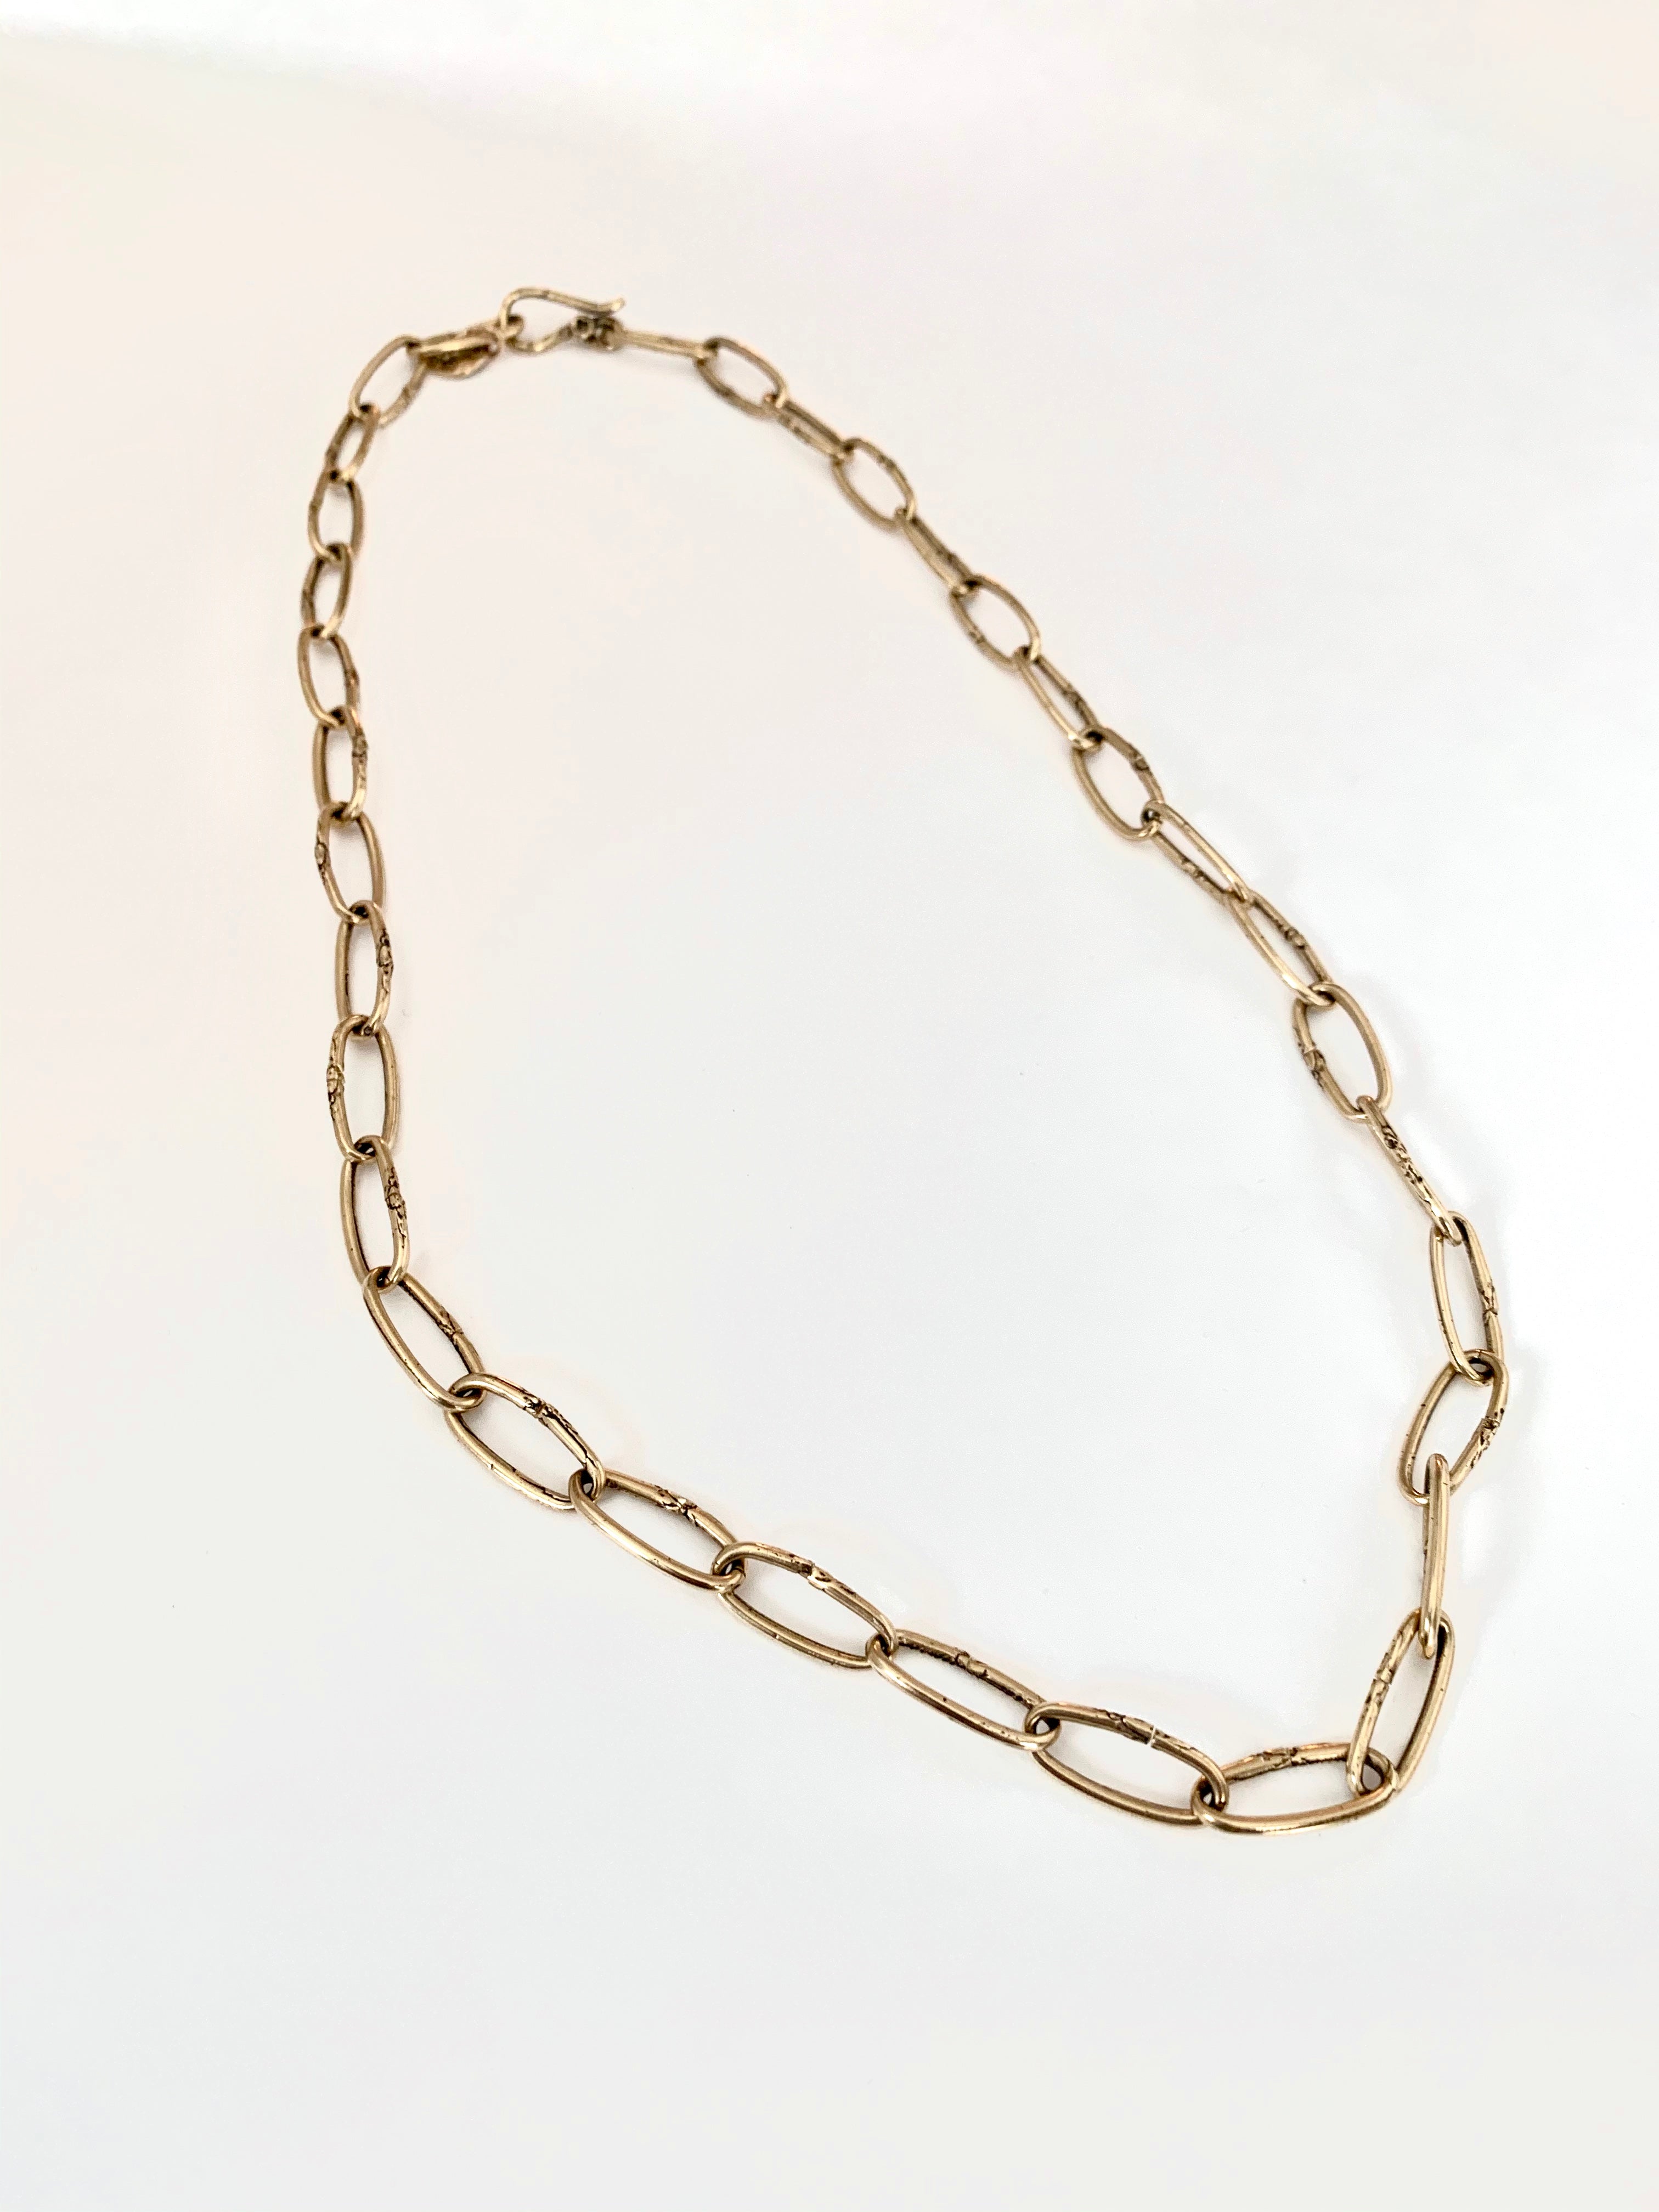 Hand Made 14K Gold Chain